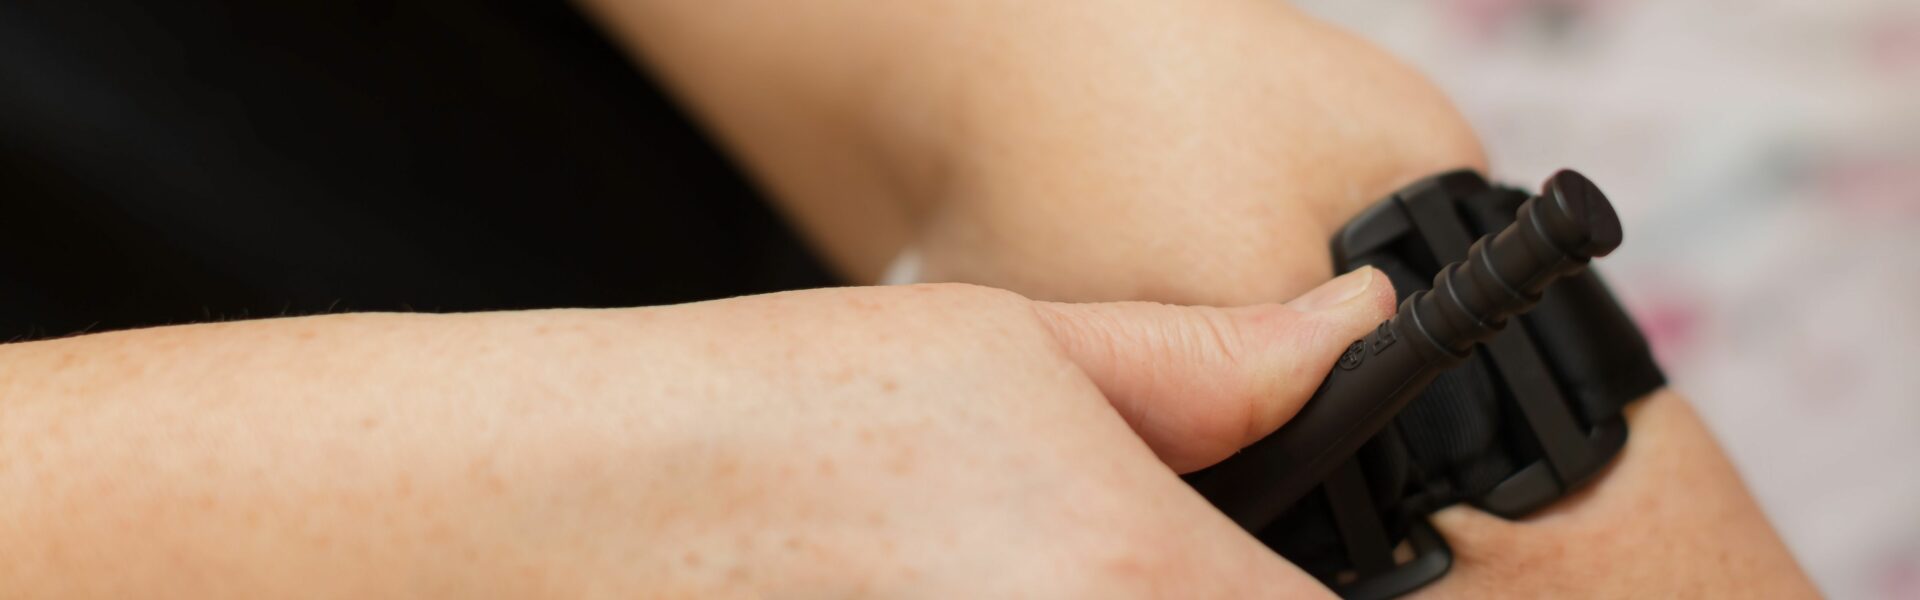 A person applying a self-tightening tourniquet to their arm. They are currently tightening it with their other hand.